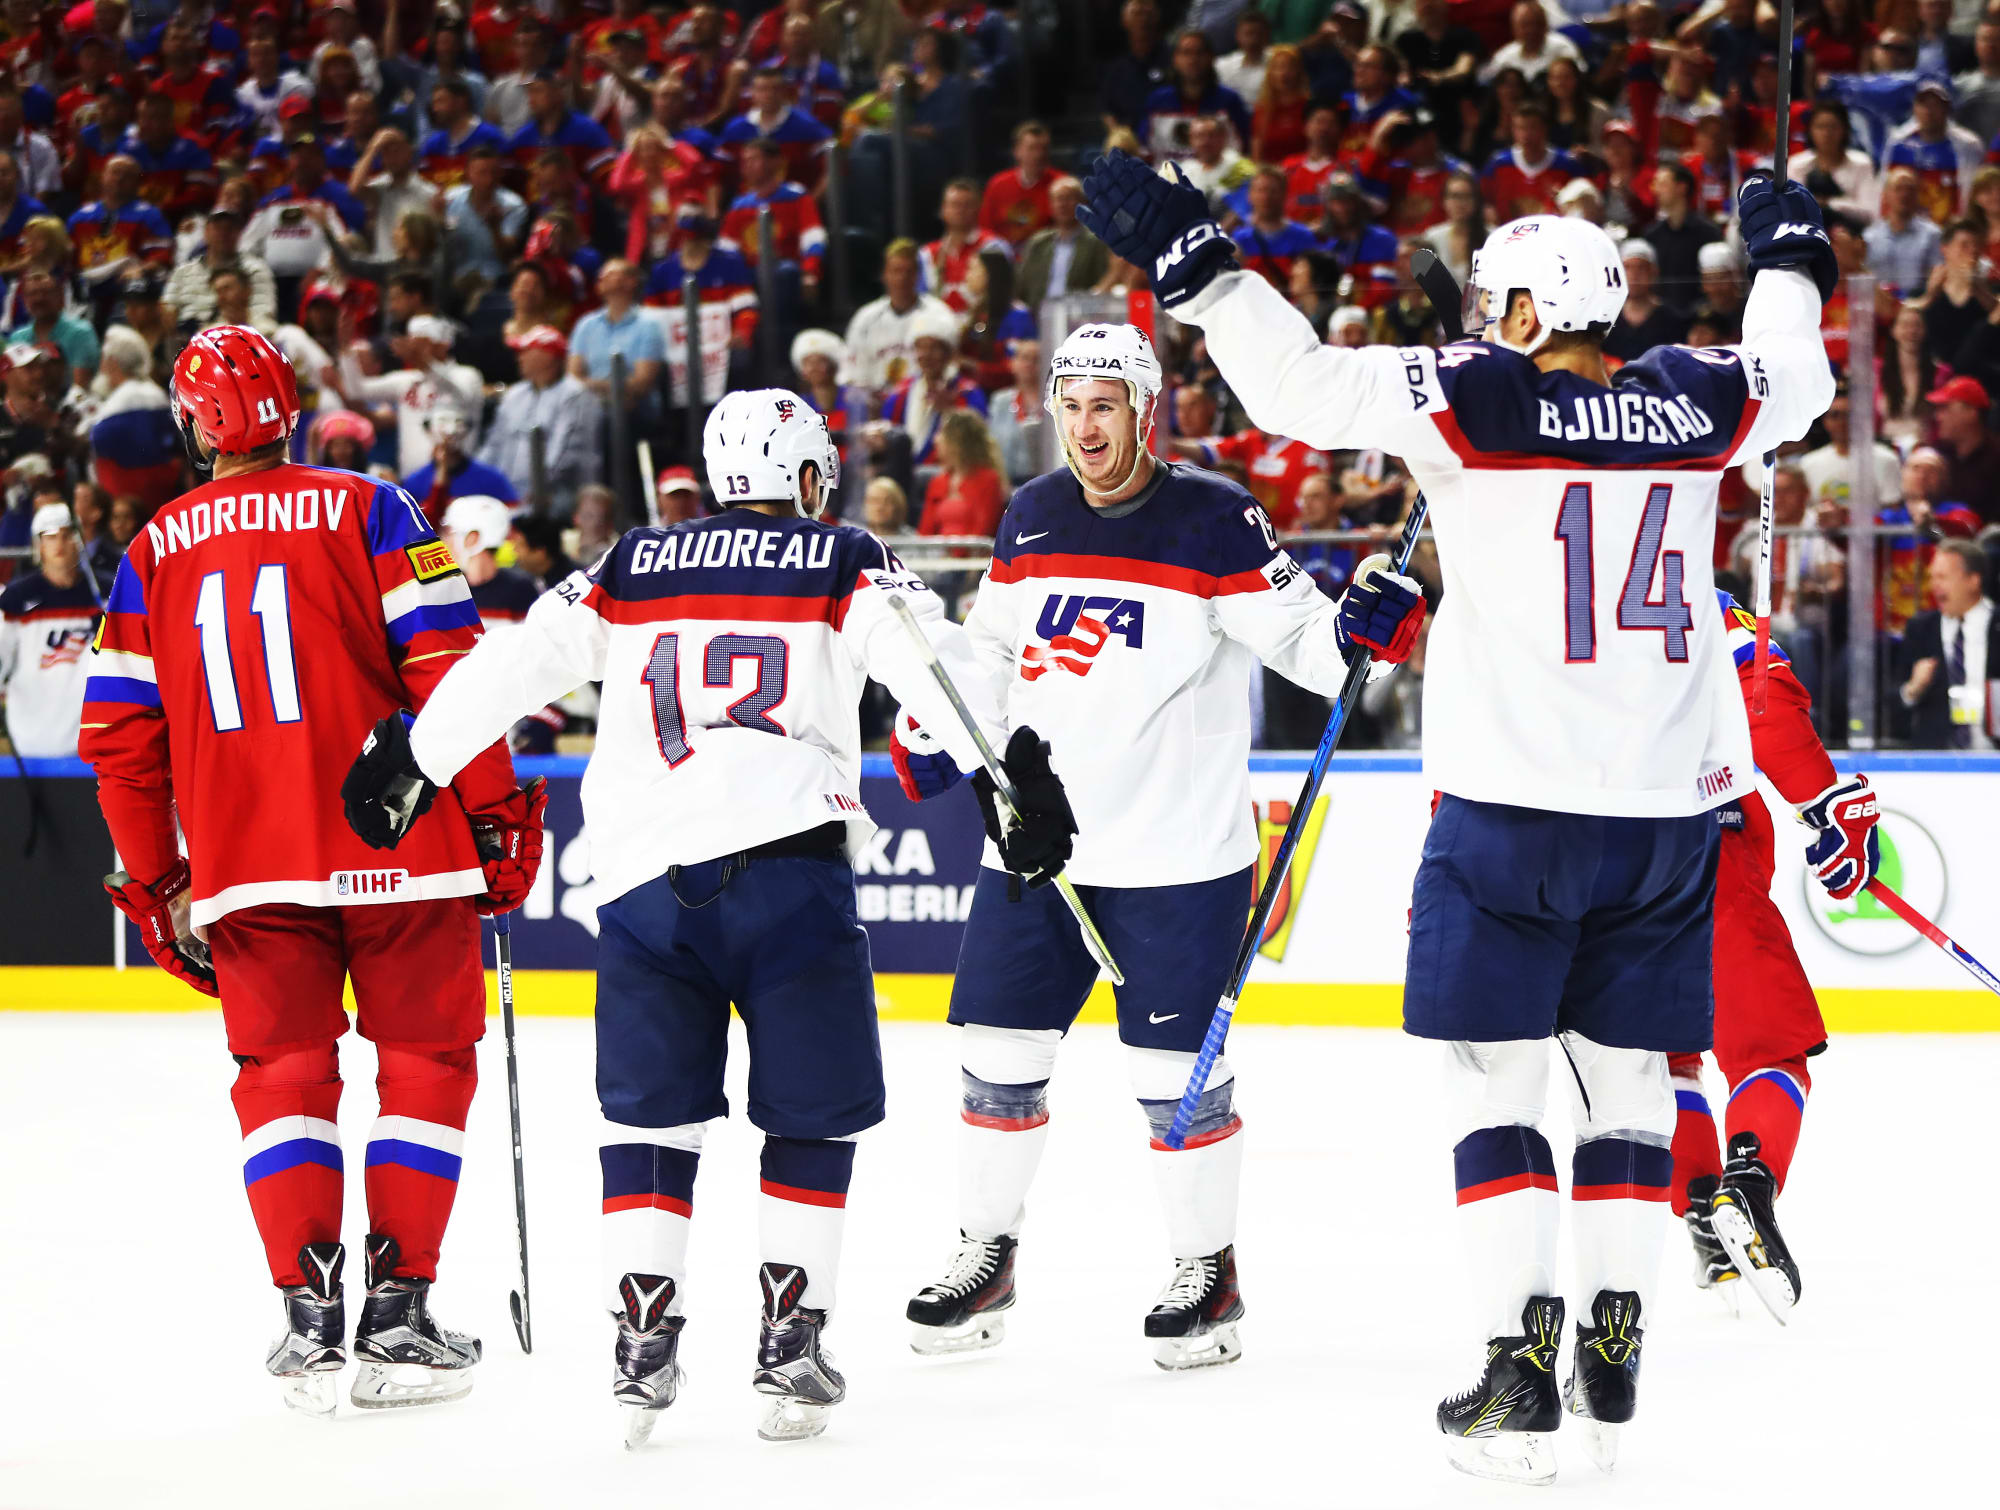 USA Hockey beats Russia, finishes top of group after six straight wins